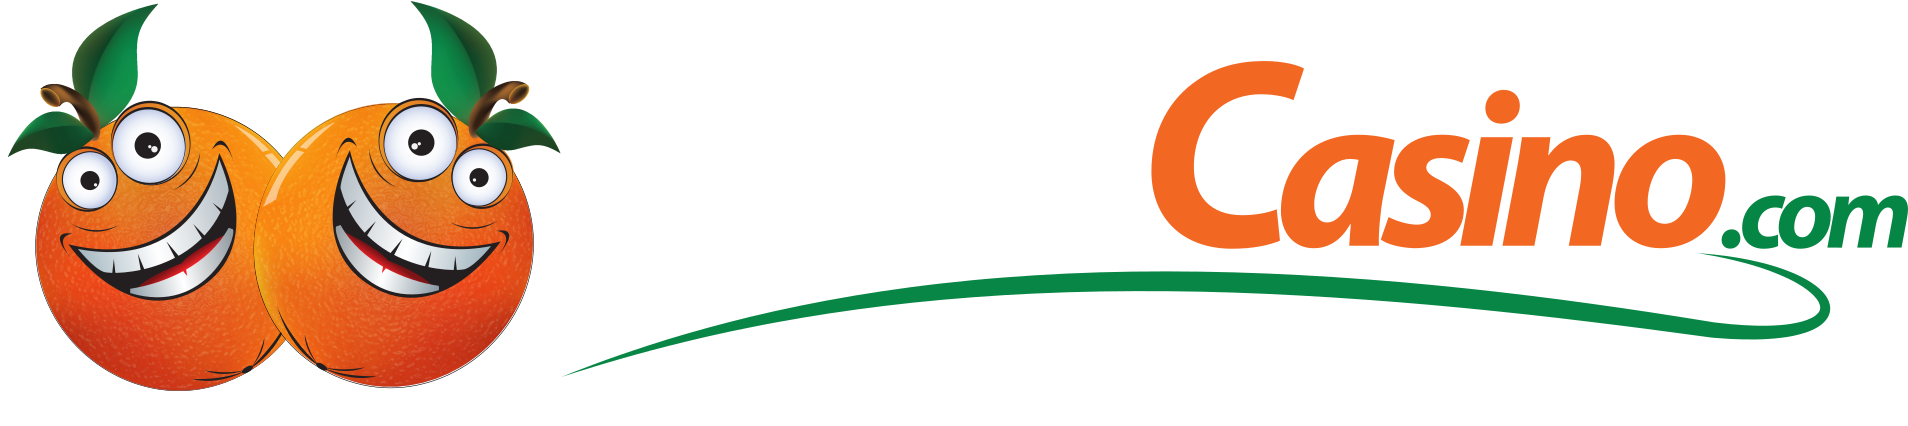 Casino as One of the In Top 3 Gambling Sites with free sign up bonuses